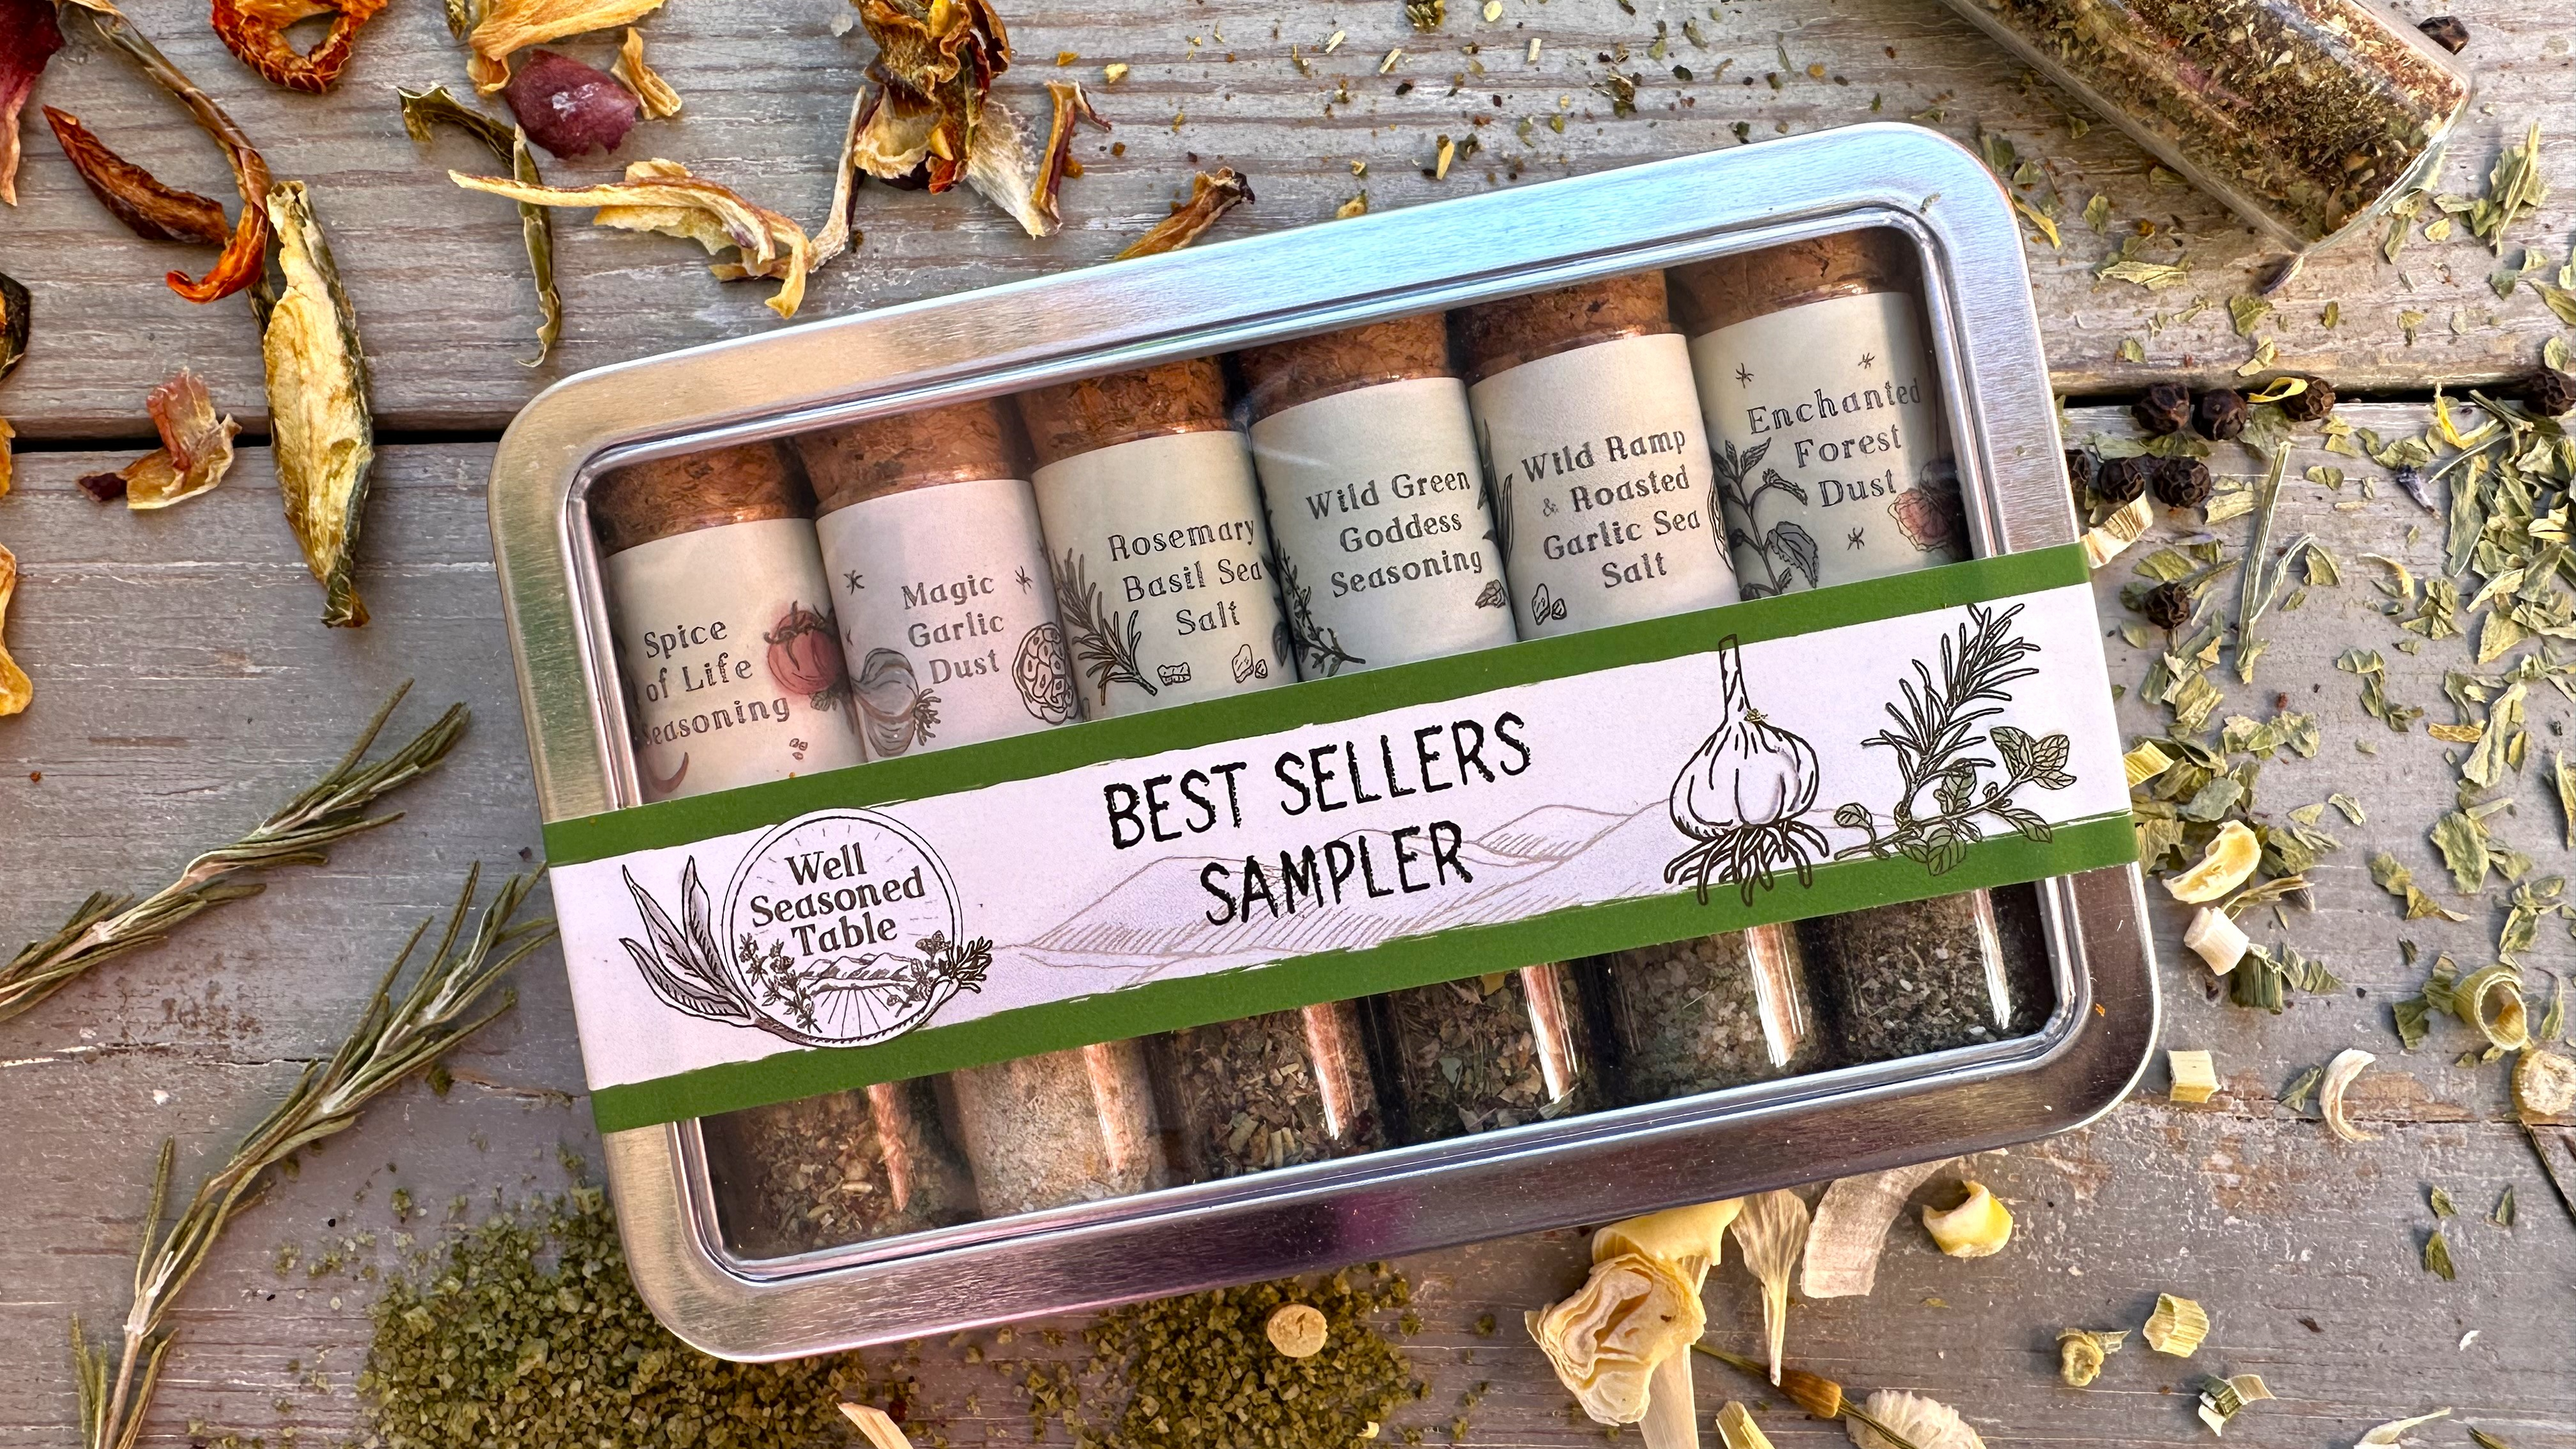 A sampler tin of vials of spices from Well Seasoned Table on a wooden background with organic dried spices around it.